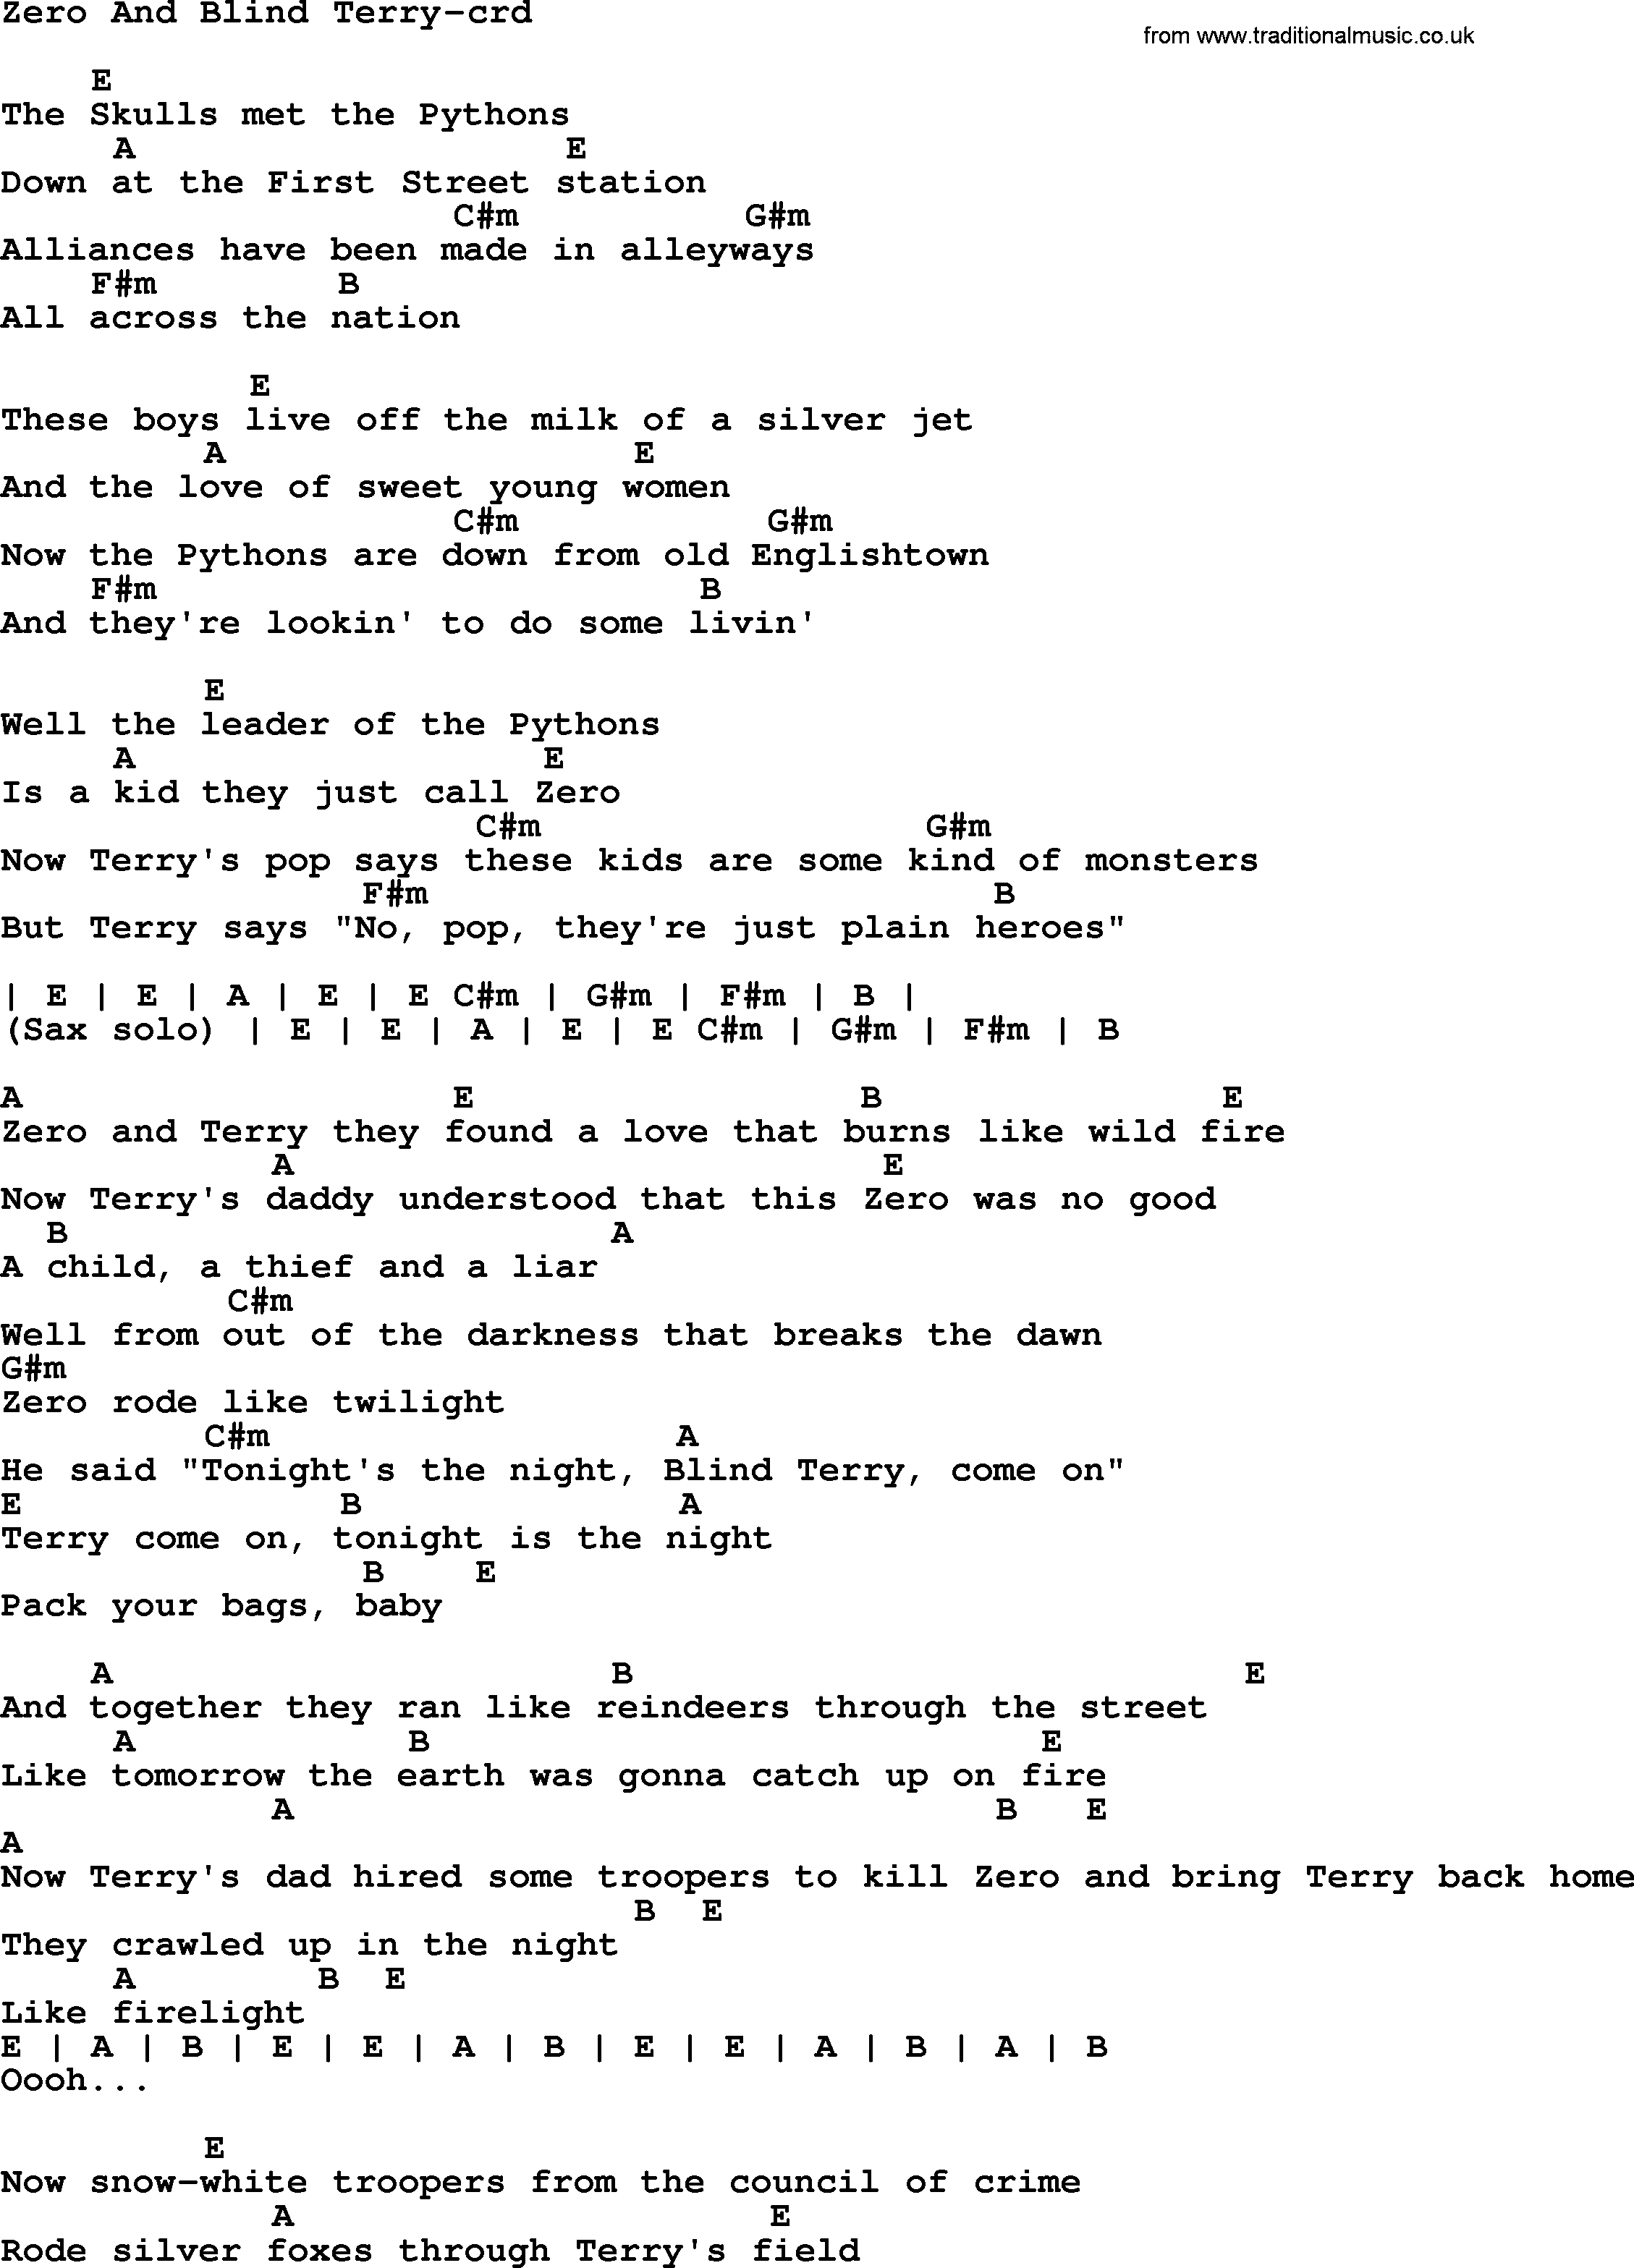 Bruce Springsteen song: Zero And Blind Terry, lyrics and chords